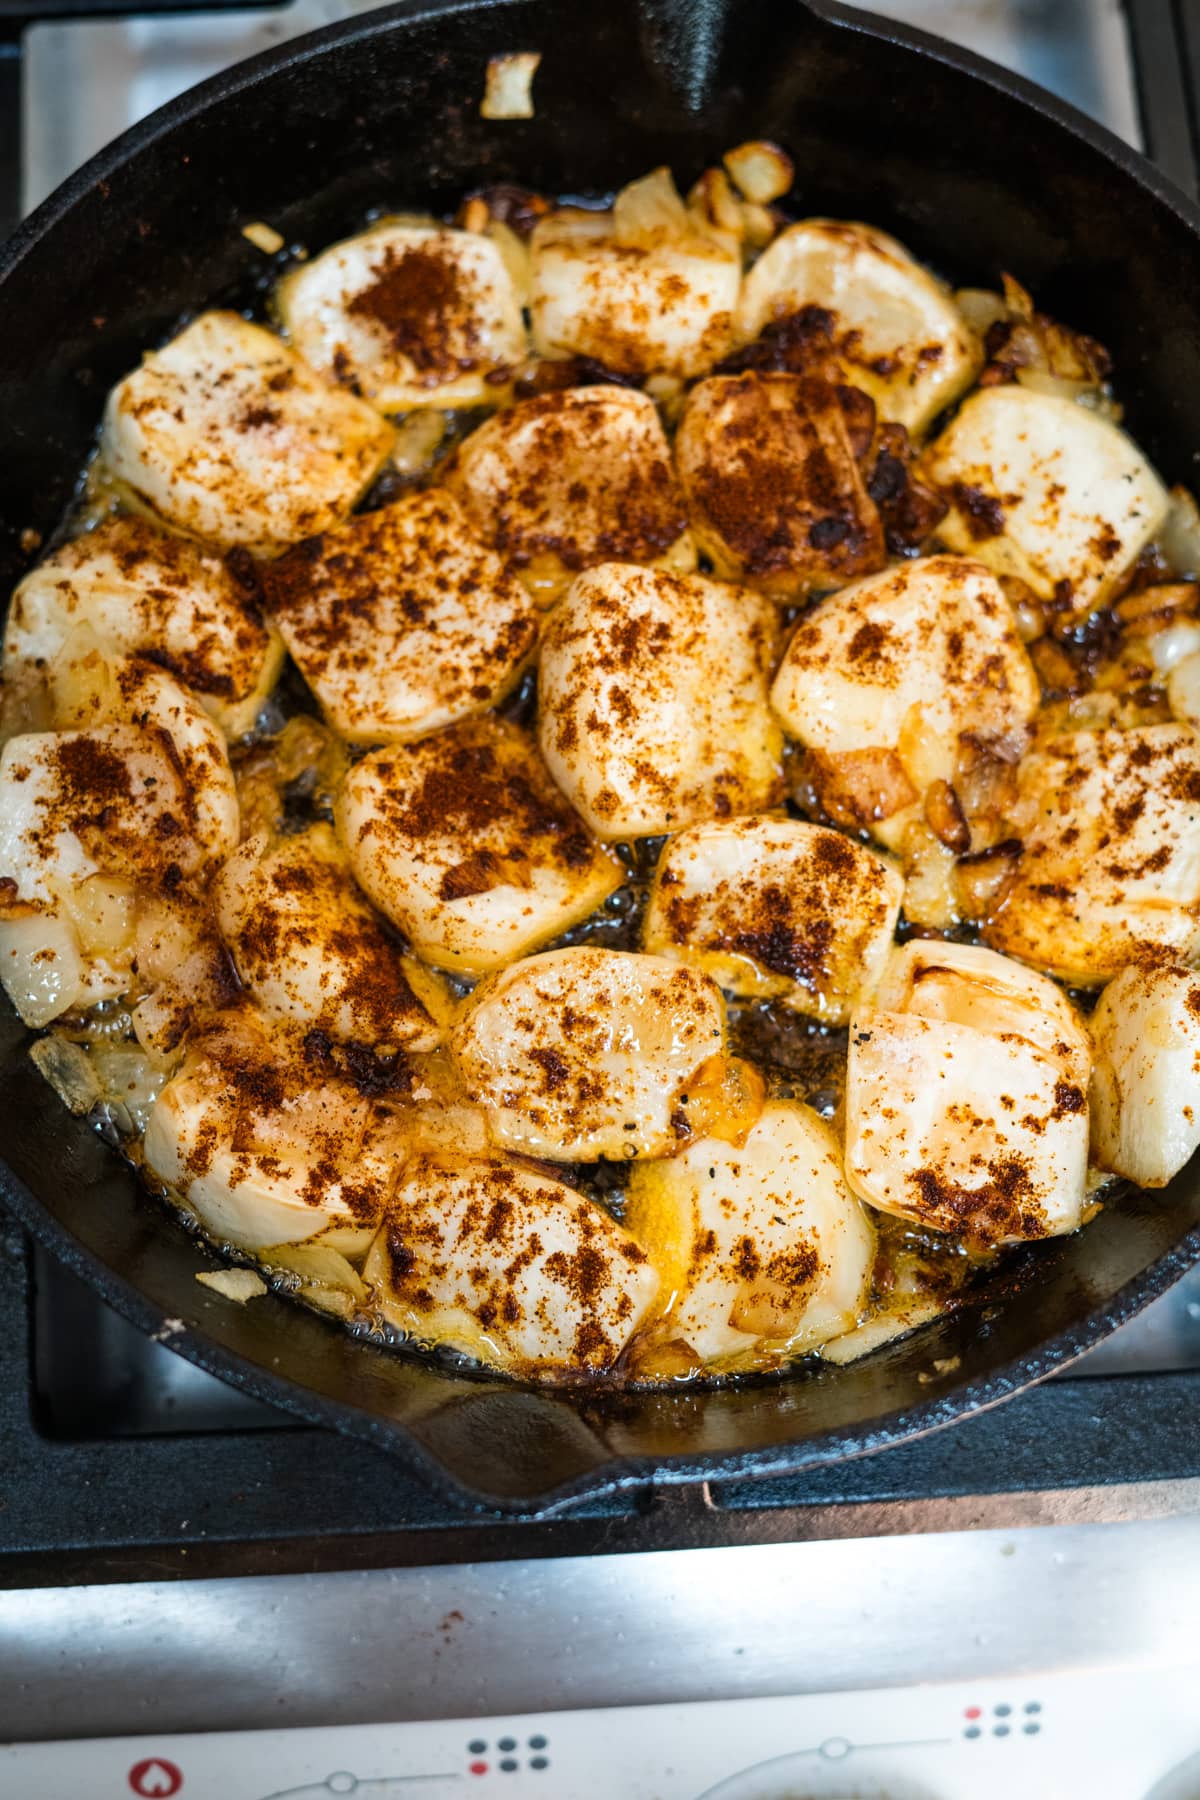 A skillet full of fried turnips on a stove top.